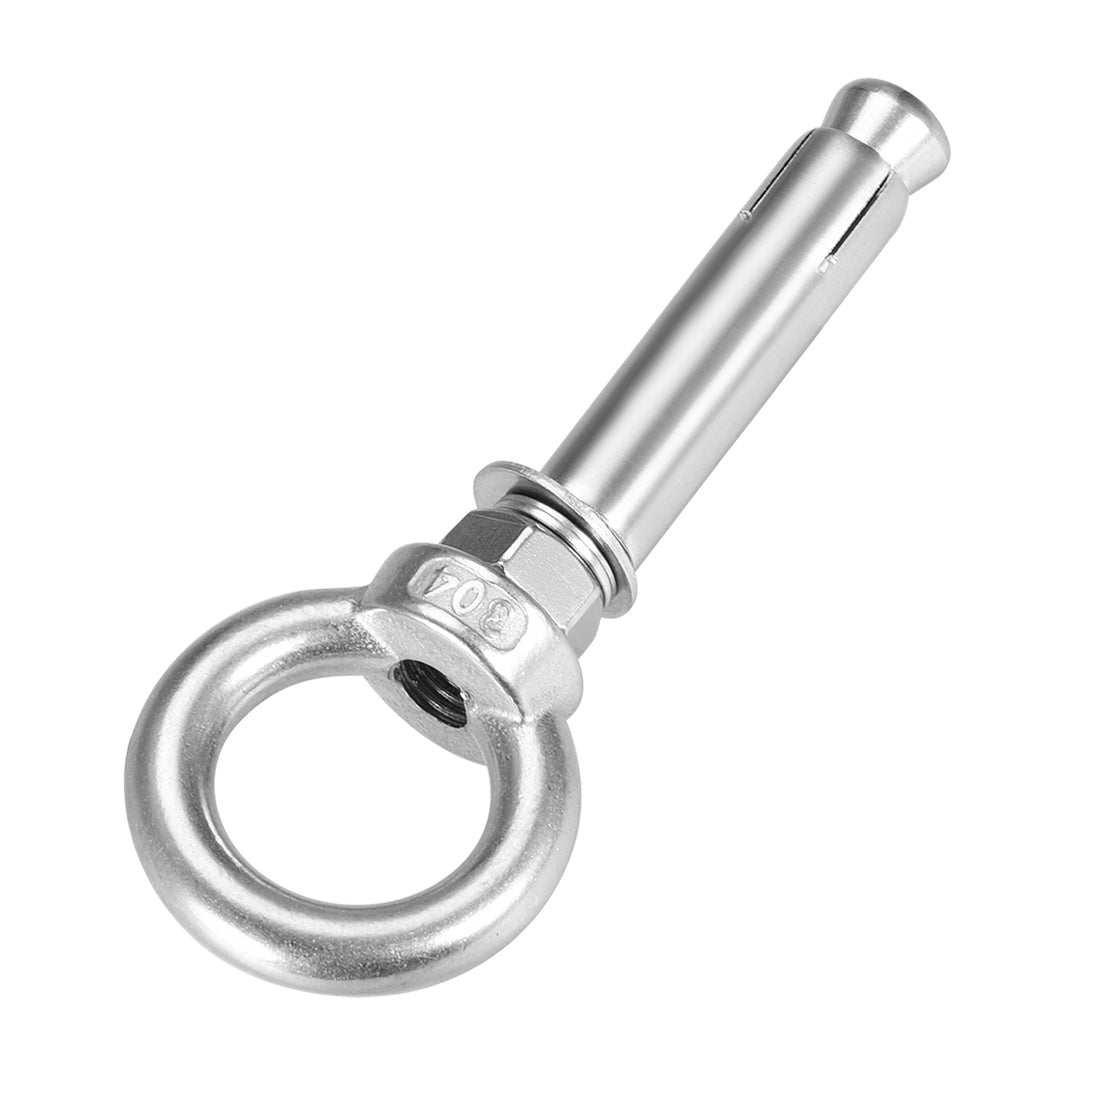 uxcell Uxcell M10 x 80 Expansion Eyebolt Eye Nut Screw with Ring Anchor Raw Bolts 1 Pcs